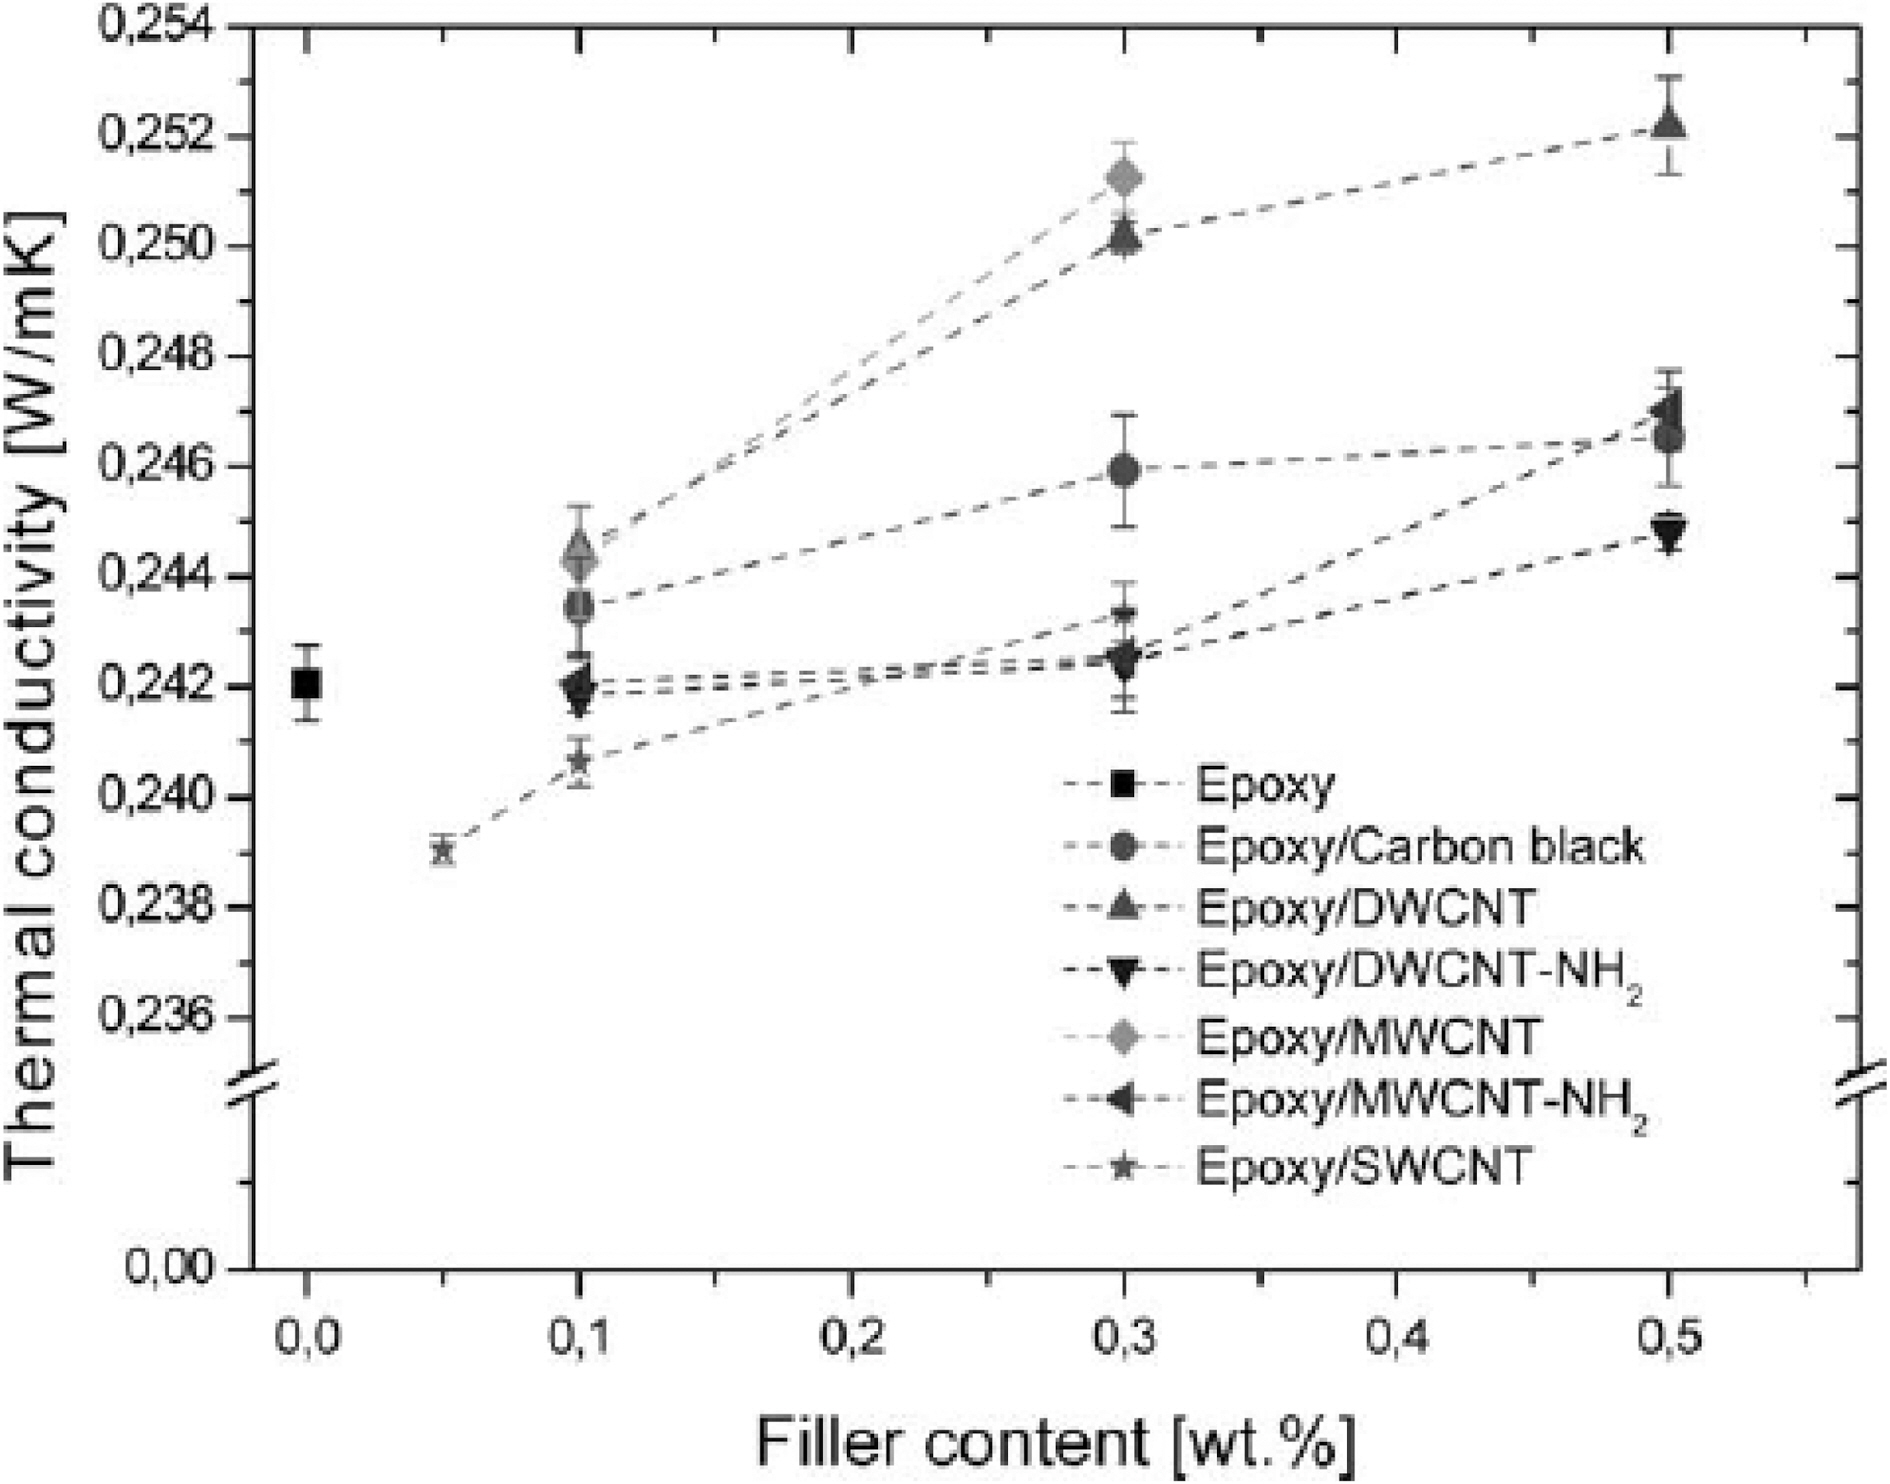 Thermal conductivity vs. filler contents with different fillers [31].